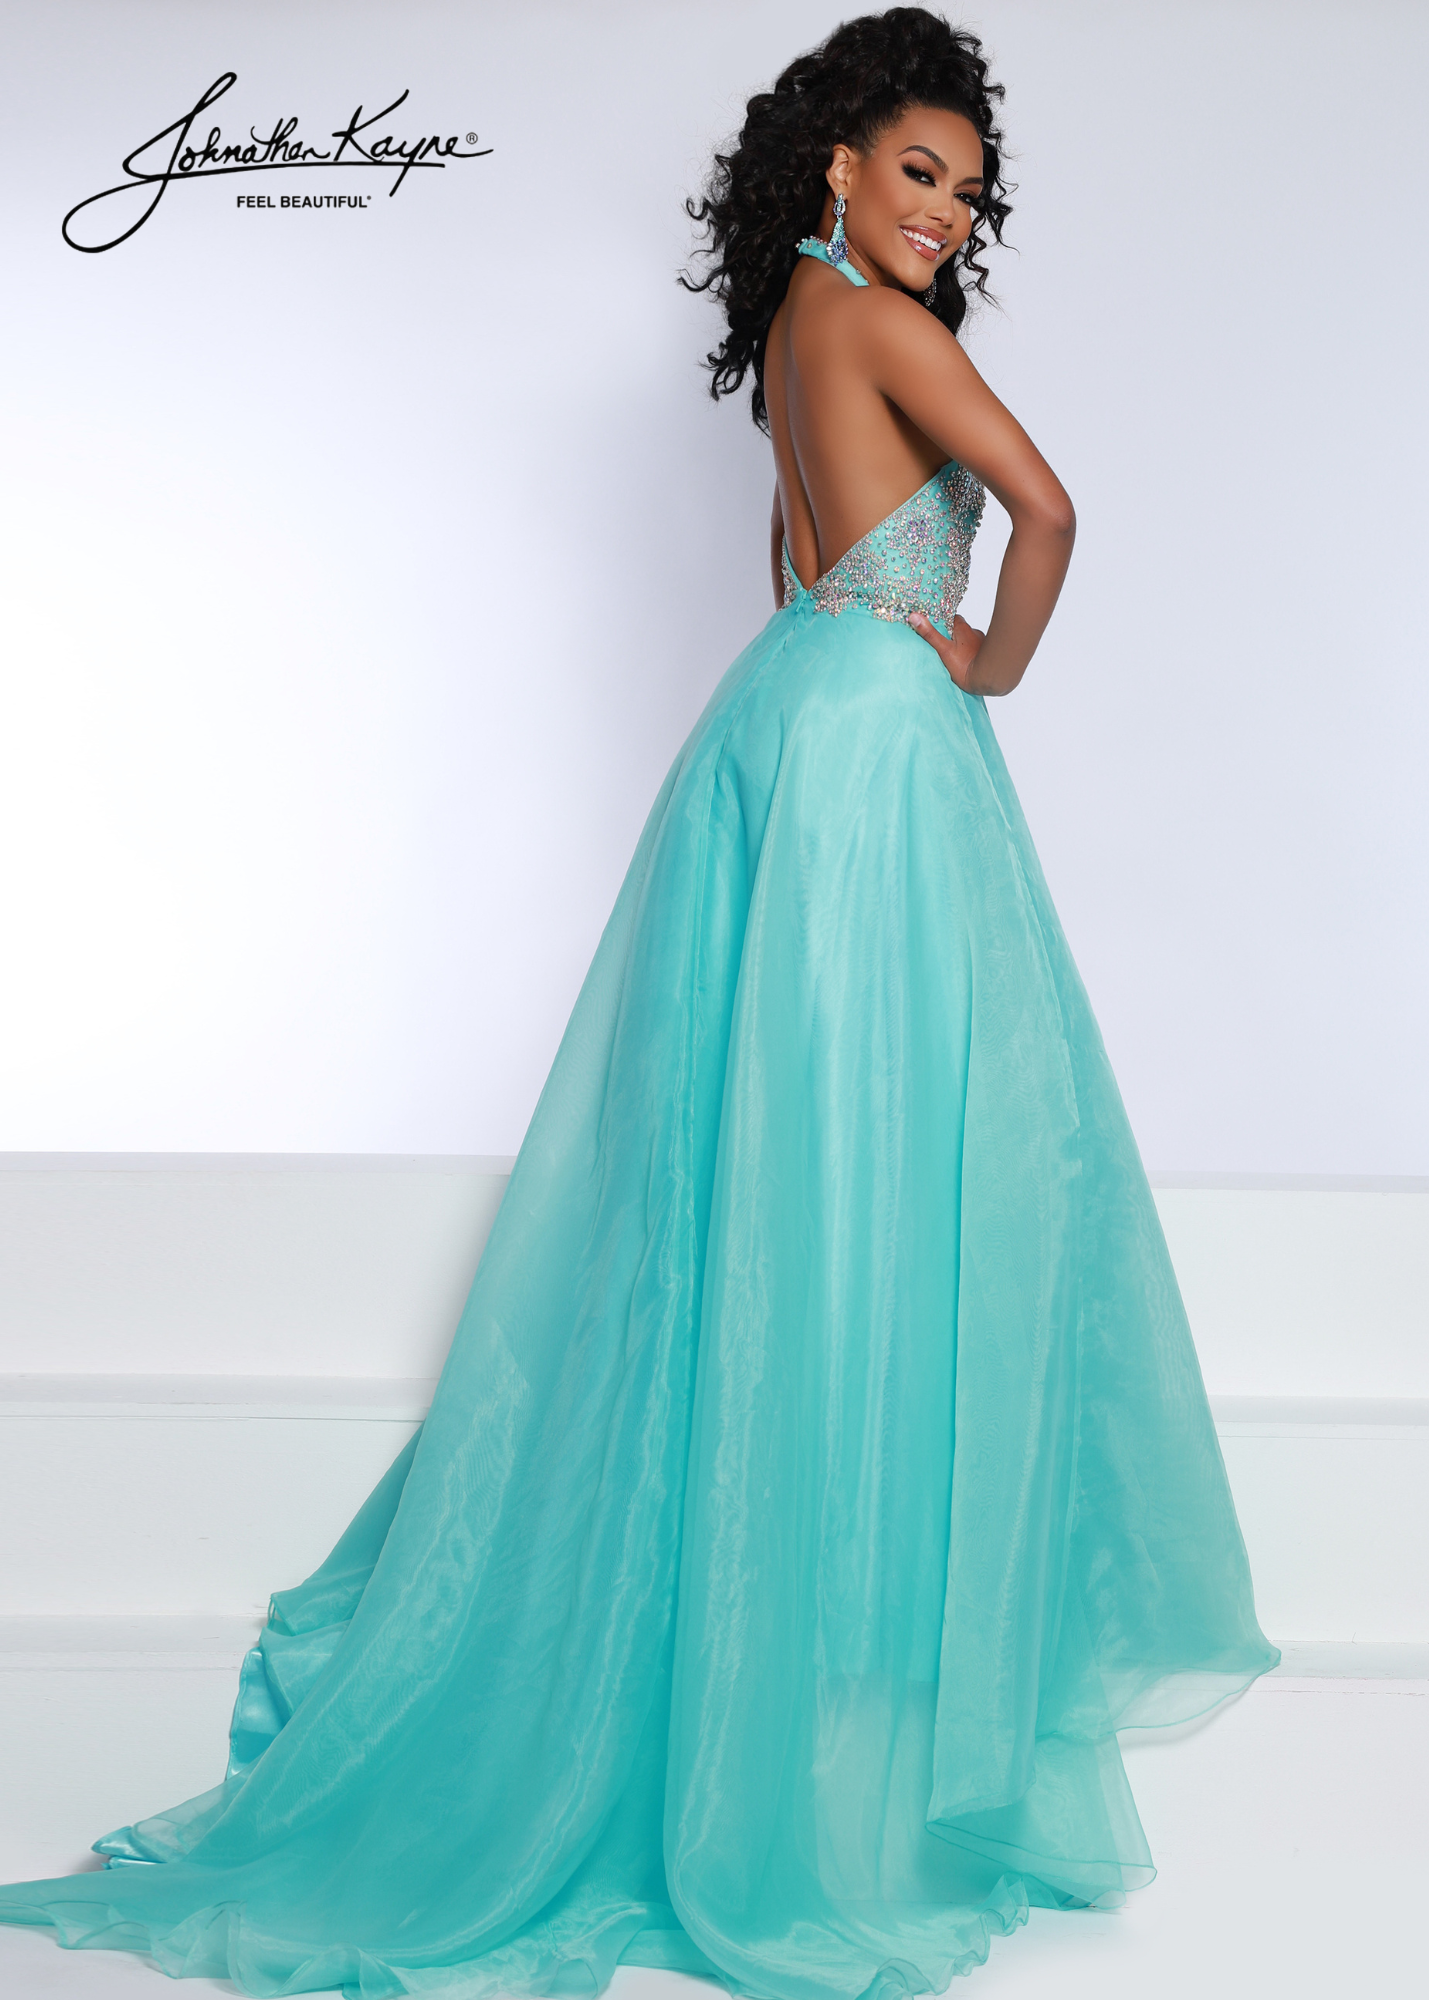 Johnathan Kayne 2676 A Line Halter Maxi Slit Prom Dress Backless Pageant Gown Crystal Grace the stage in this divine A-line! This organza gown features a hand beaded halter bodice with a deep plunge for a touch of modern sophistication.  Sizes: 00-16  Colors: Aqua, Neon Pink